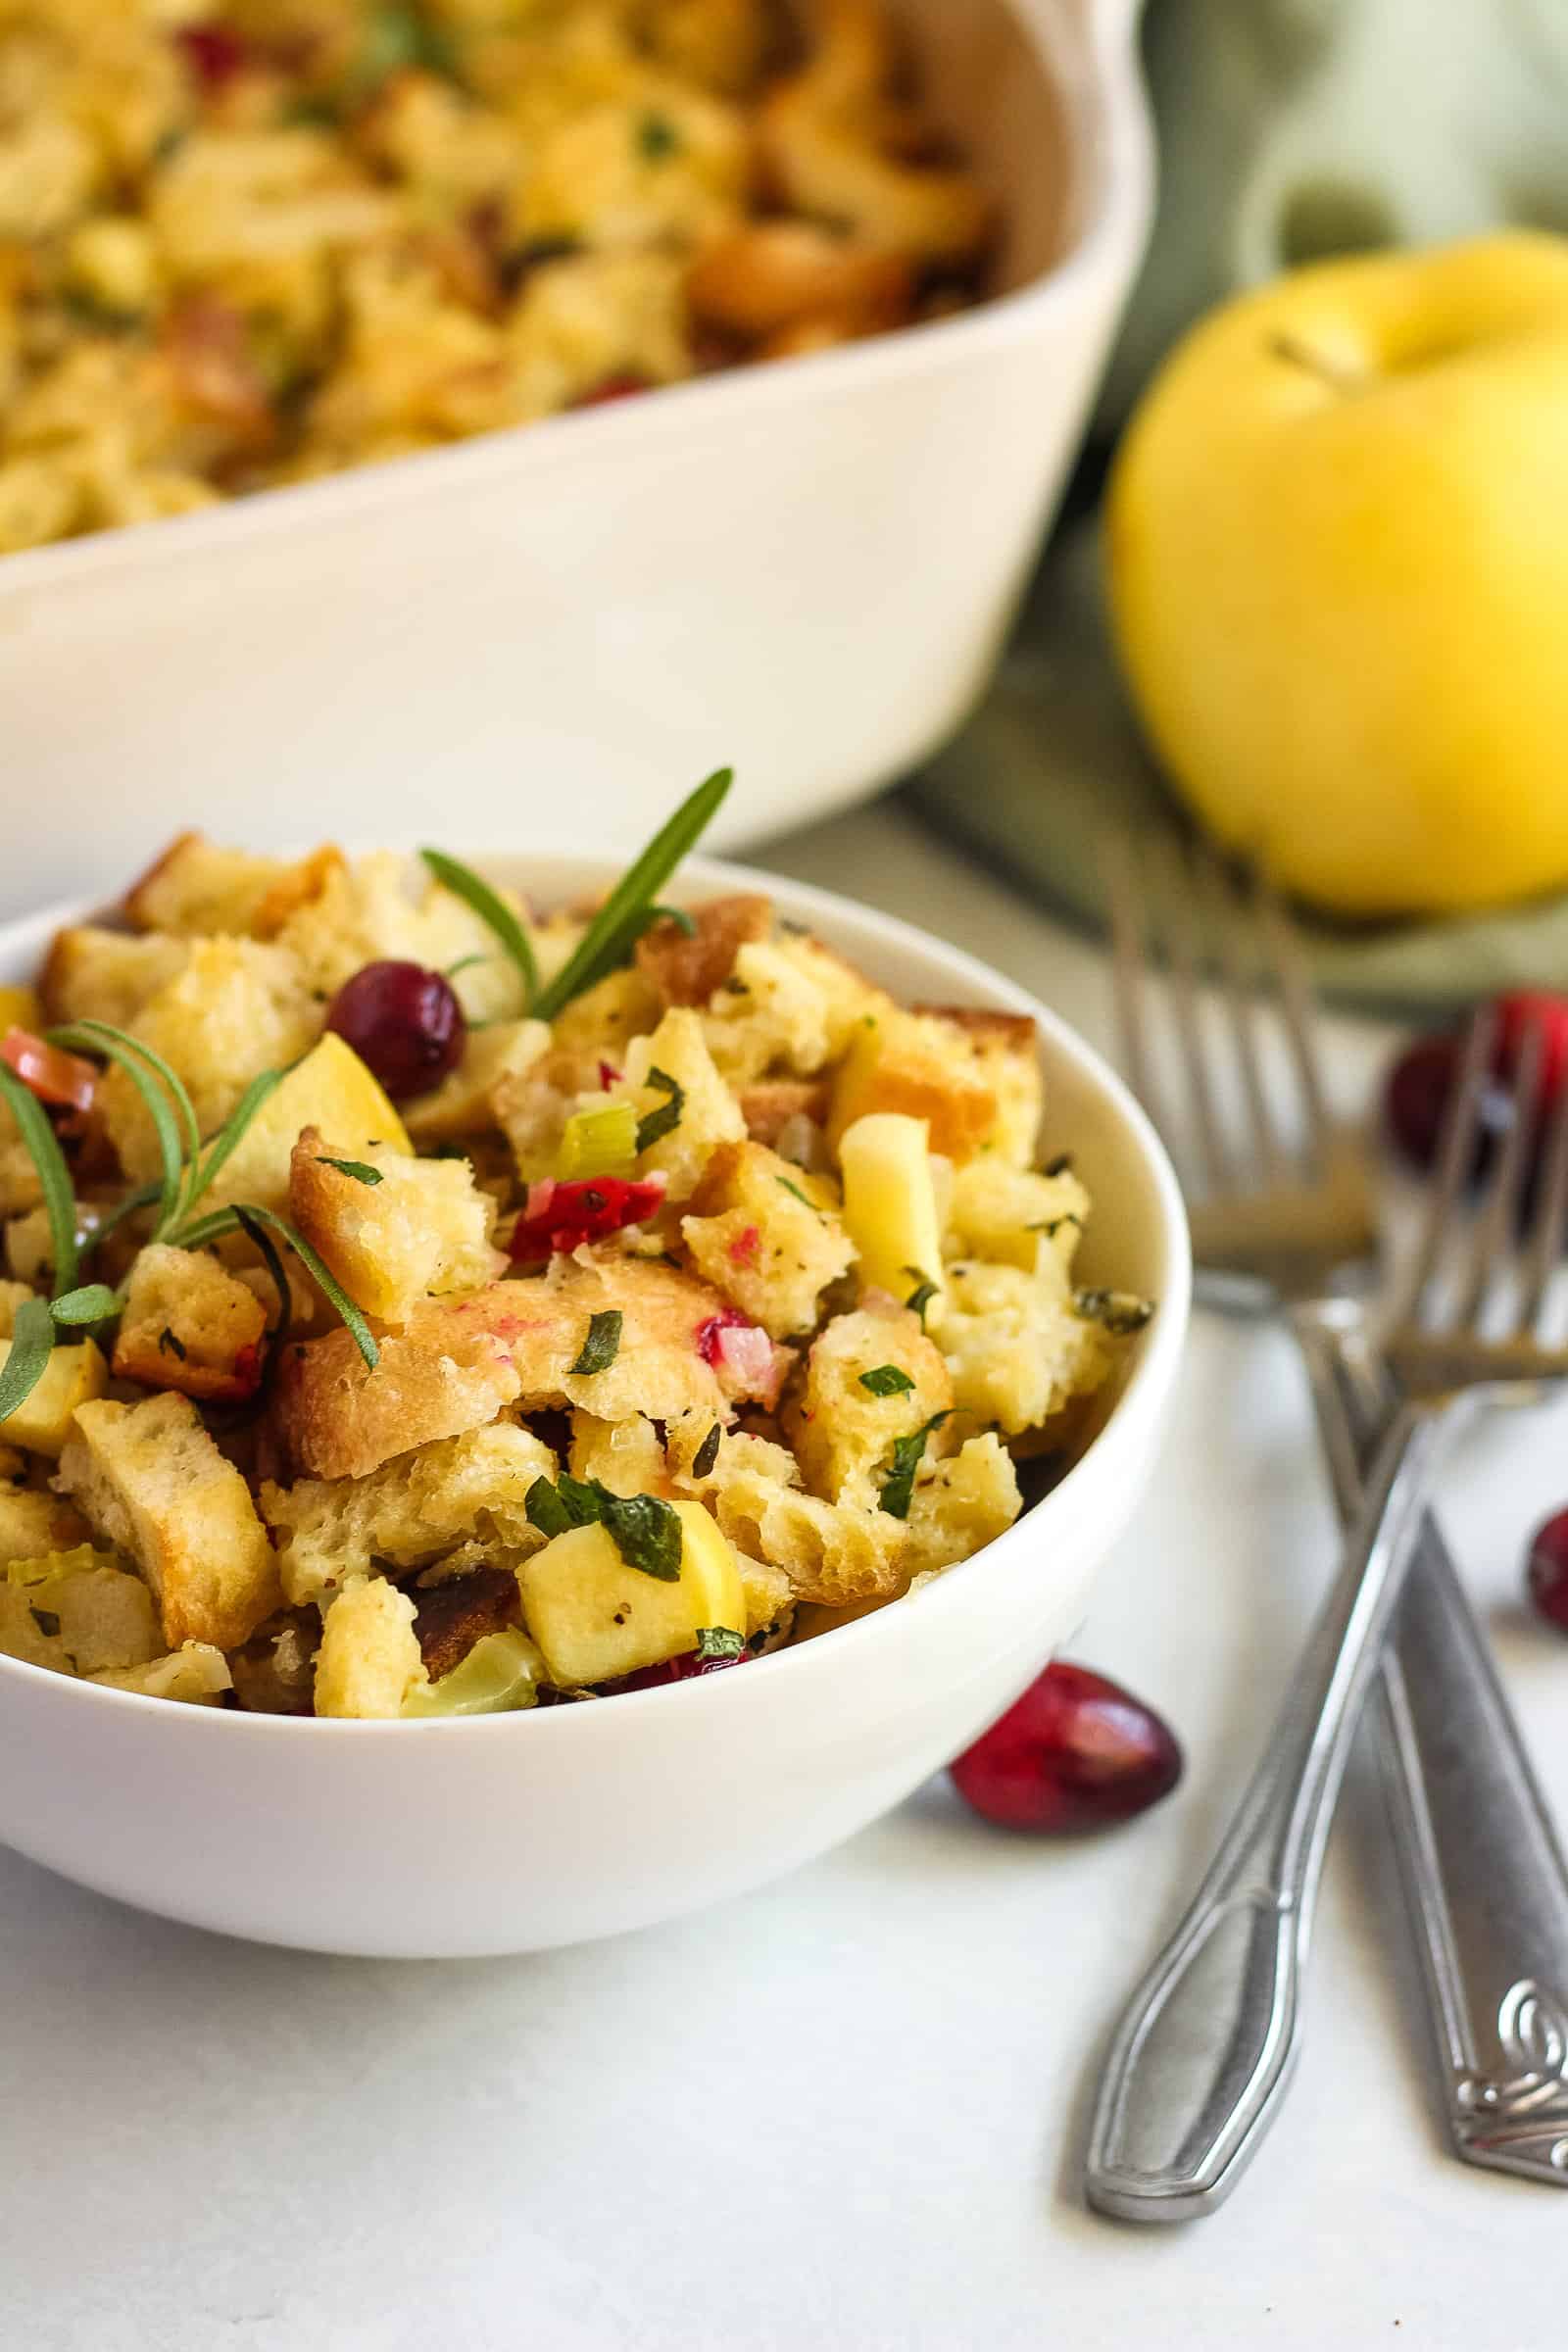 This Apple Cranberry Holiday Stuffing is a delicious Arctic apples recipe for the holidays. Pack in the flavor for an easy vegetarian holiday side dish | Street Smart Nutrition